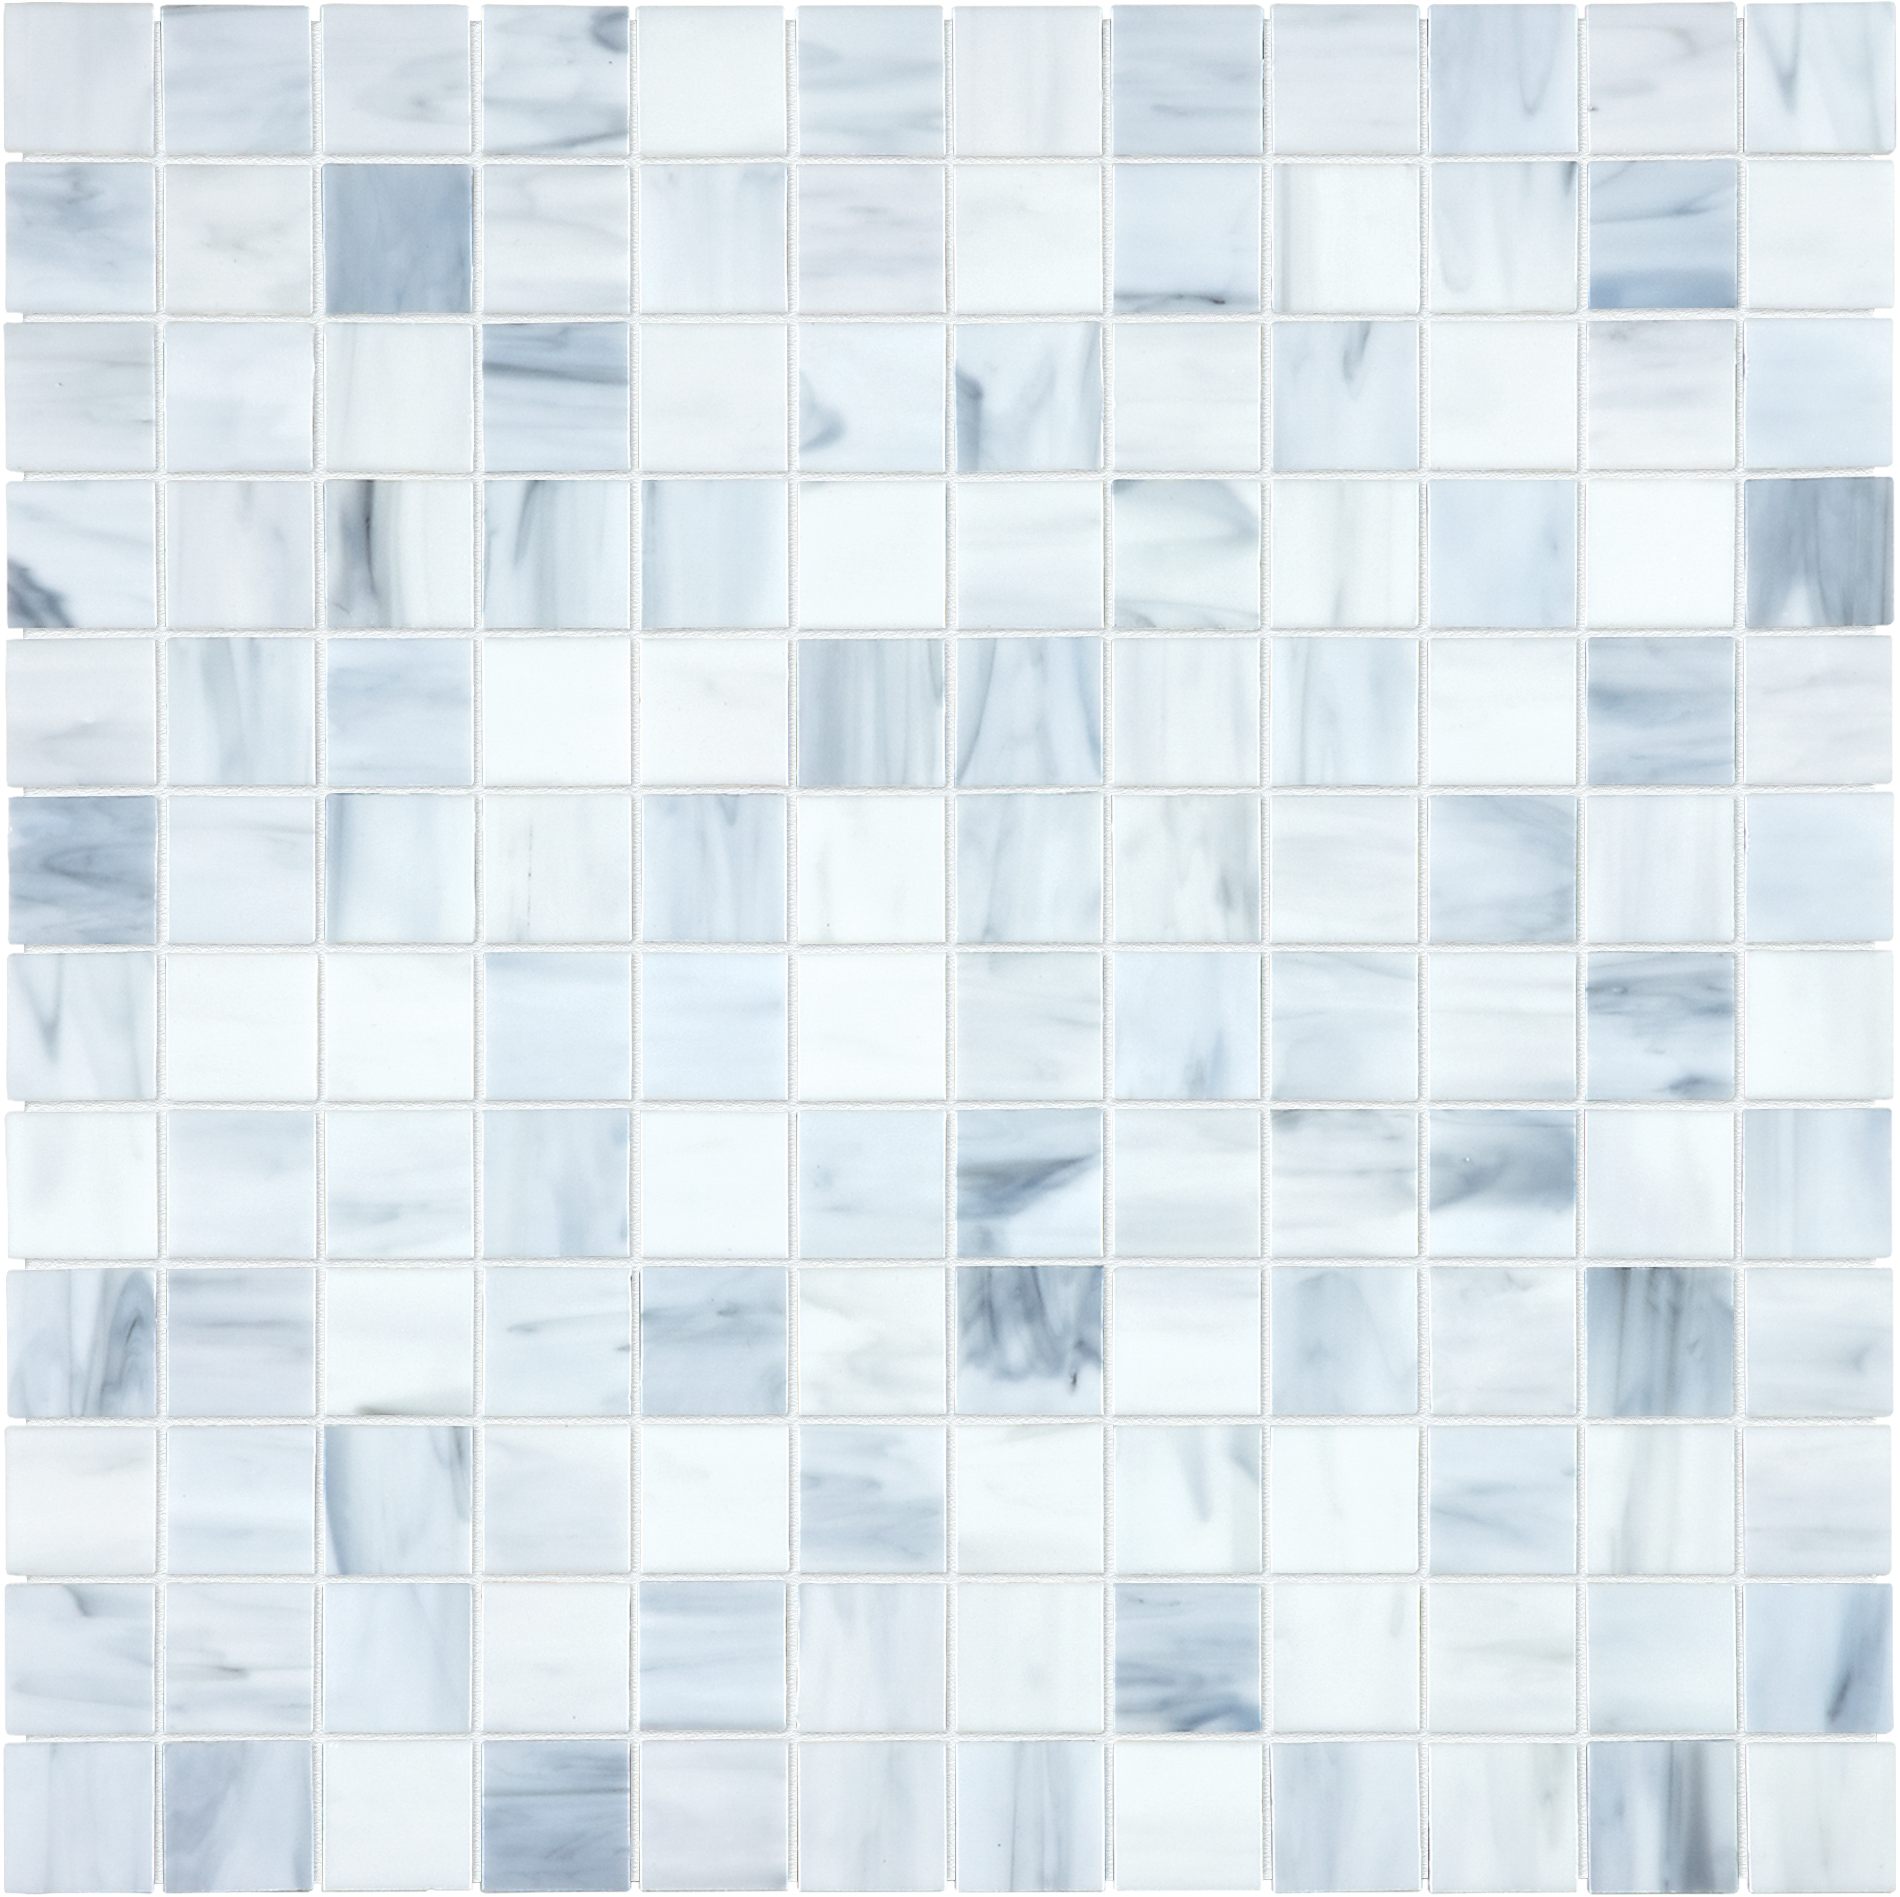 carrara straight stack 1x1-inch pattern fused glass mosaic from baroque anatolia collection distributed by surface group international glossy finish rounded edge mesh shape